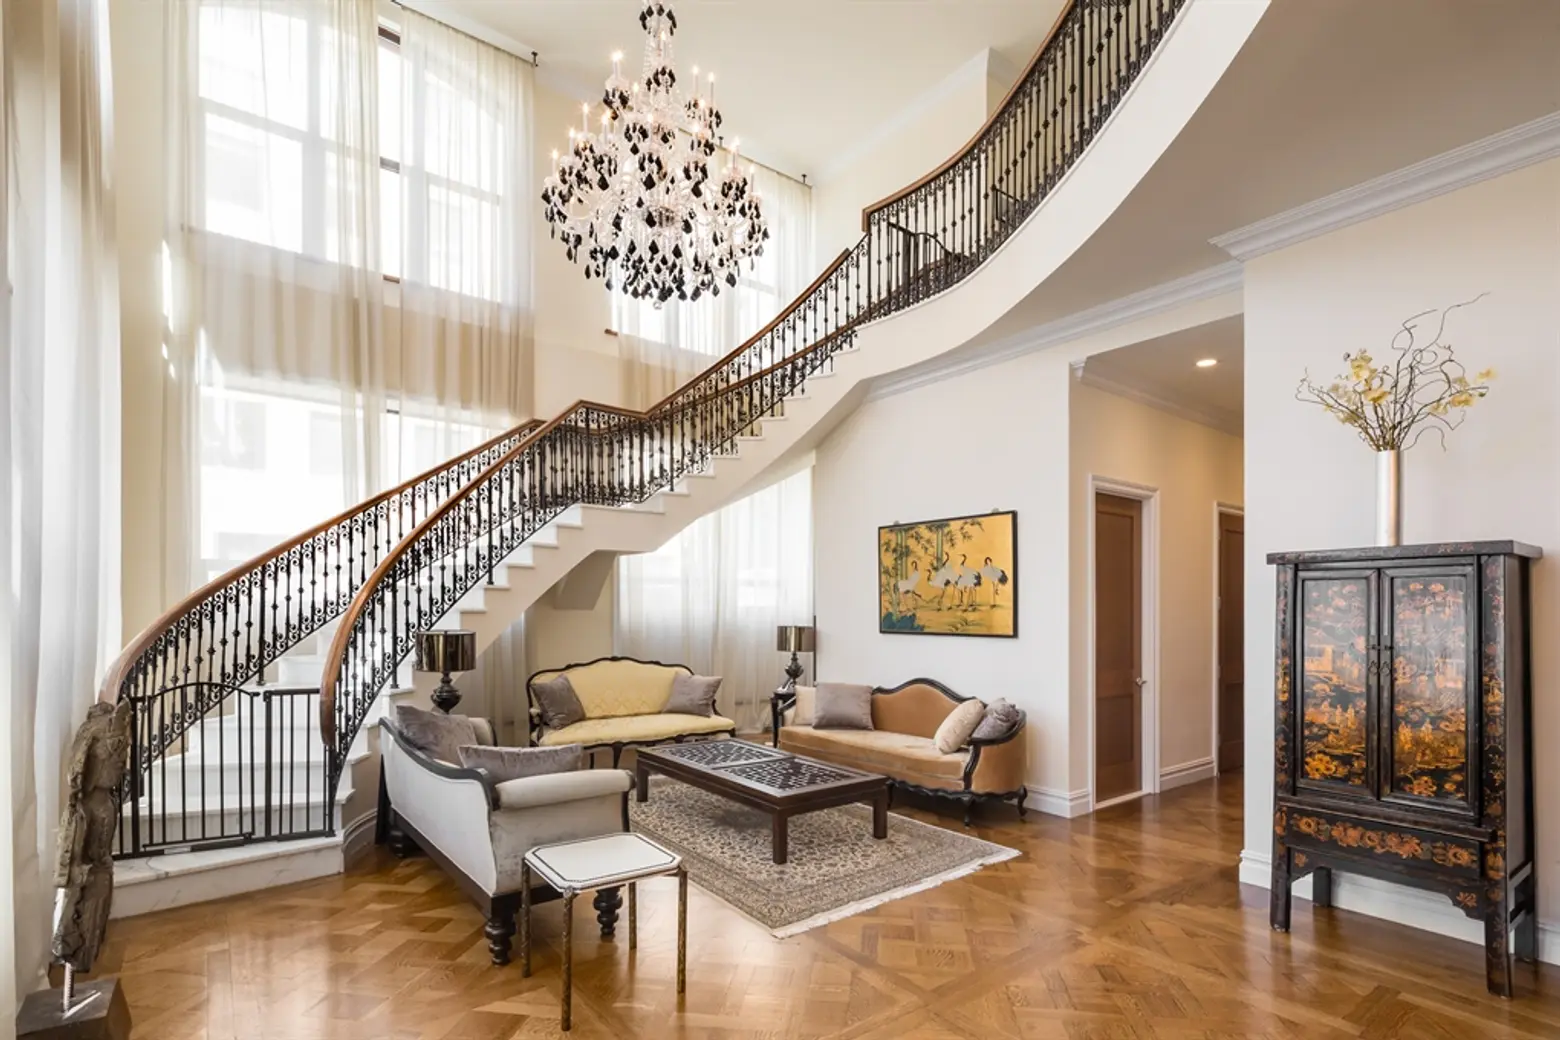 Gorgeous Versailles-Inspired Townhouse with Sweeping Staircase Sells for $6.7 Million